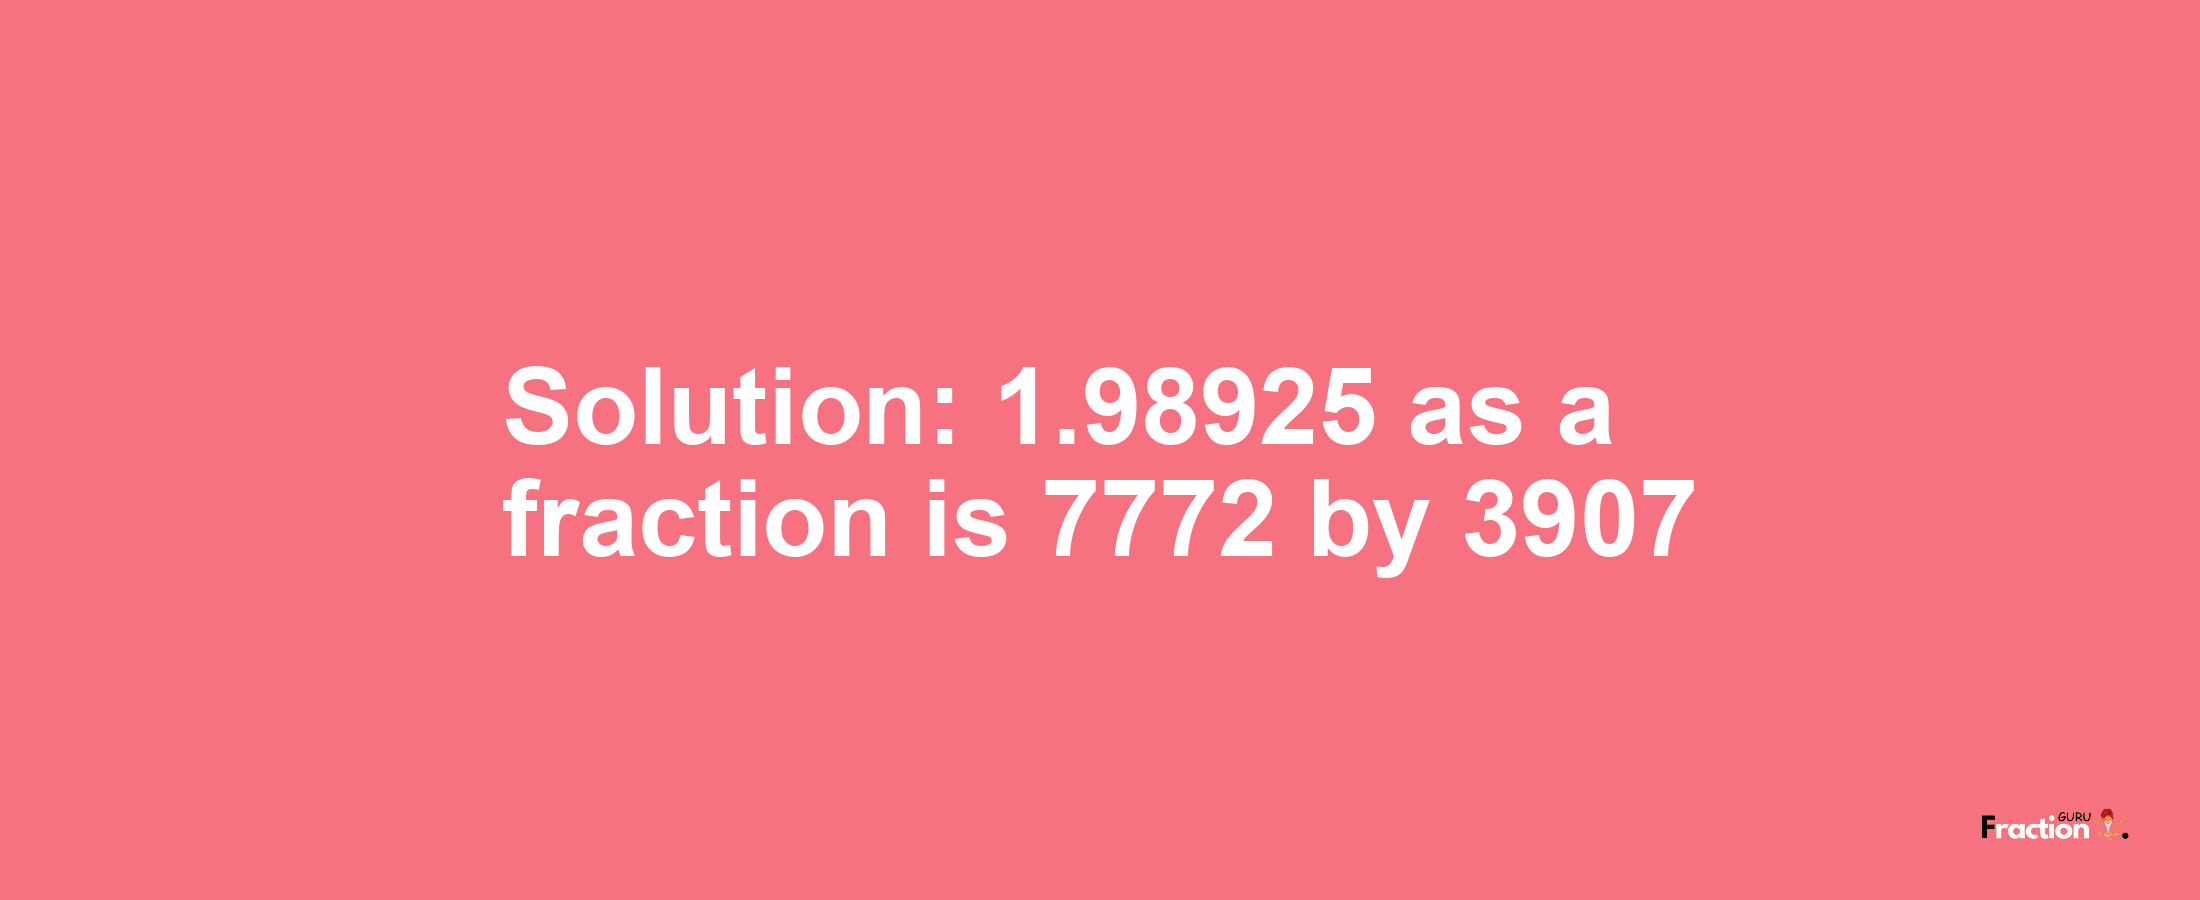 Solution:1.98925 as a fraction is 7772/3907